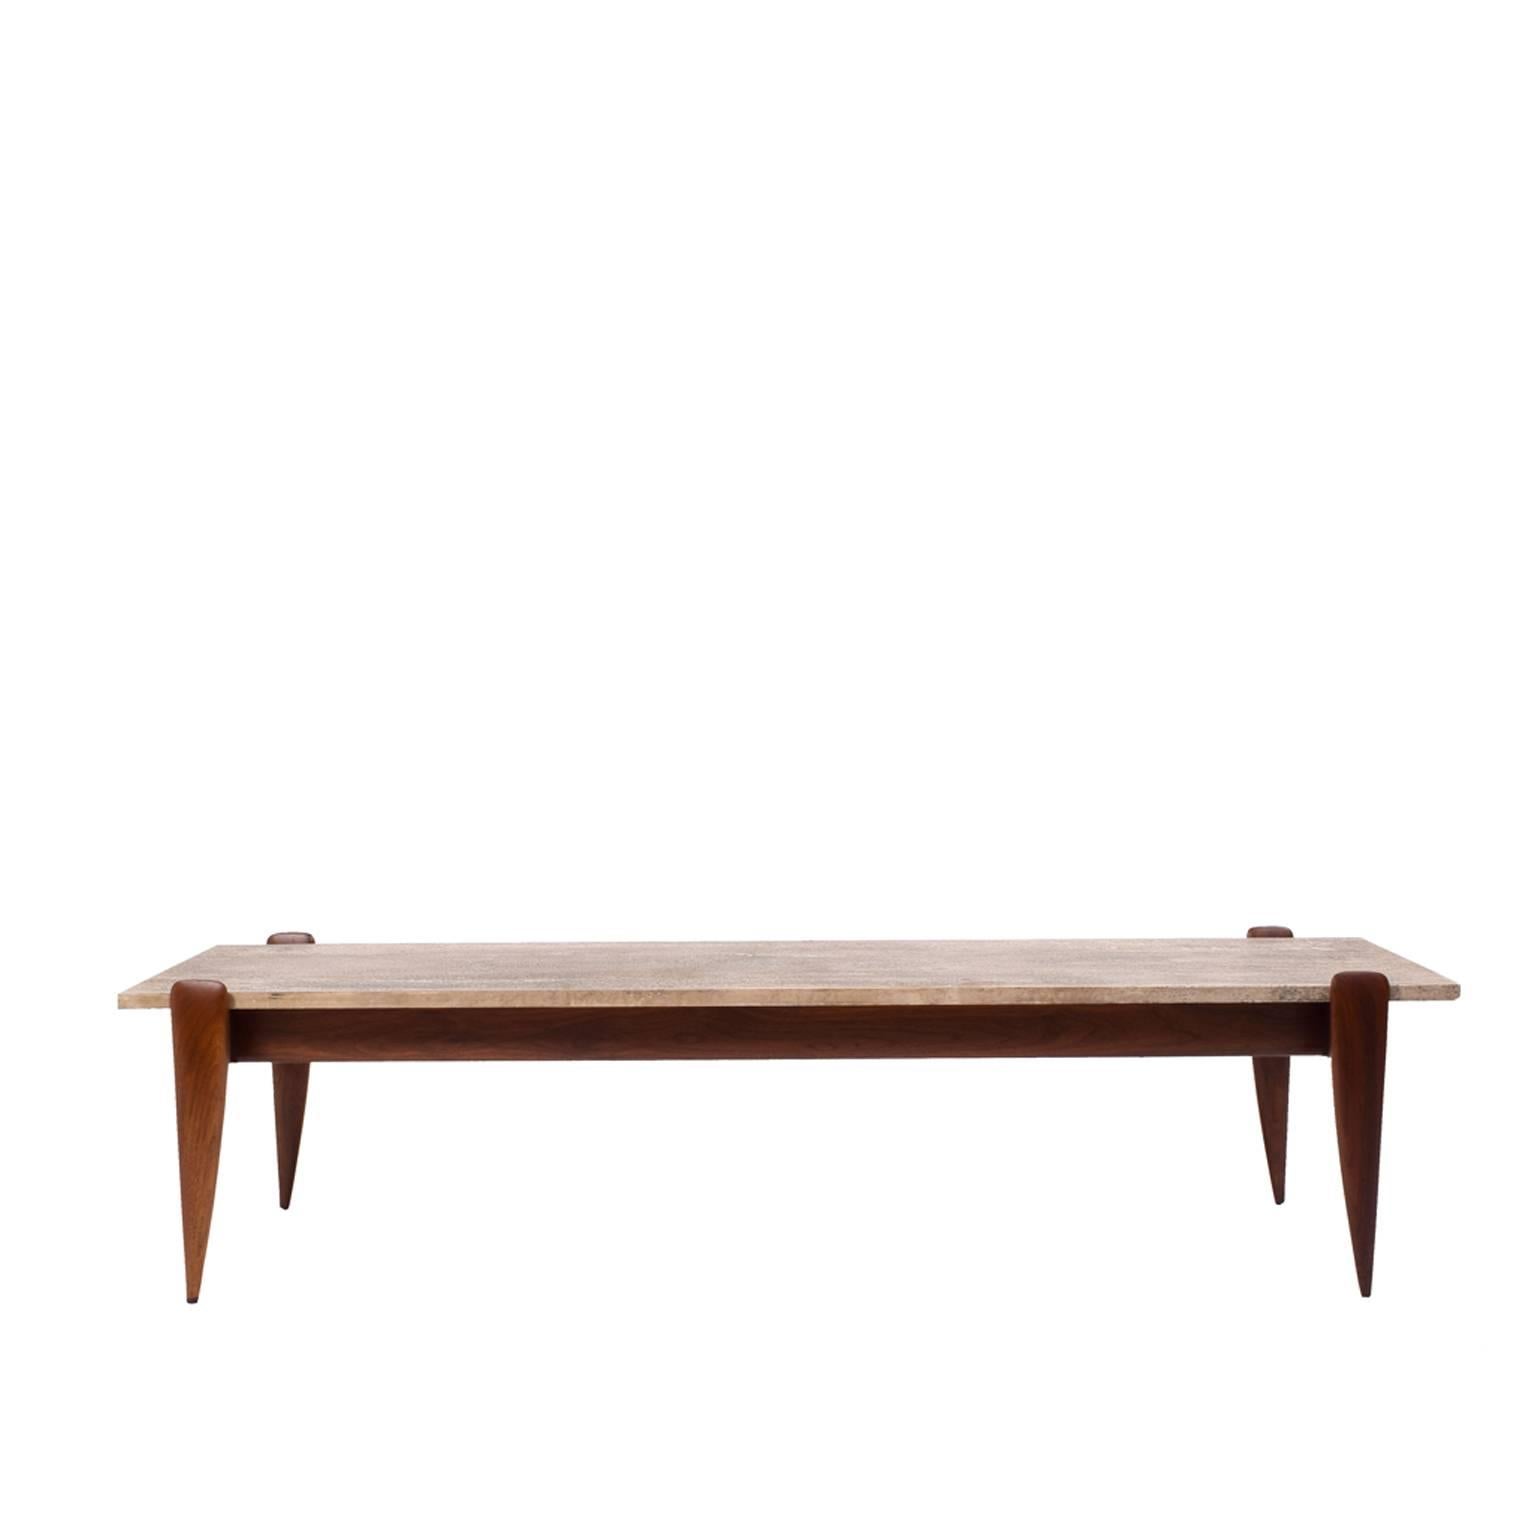 Model # 2137, solid walnut base with travertine top. Curved and tapered legs. Retains paper label,
M. Singer and Sons.